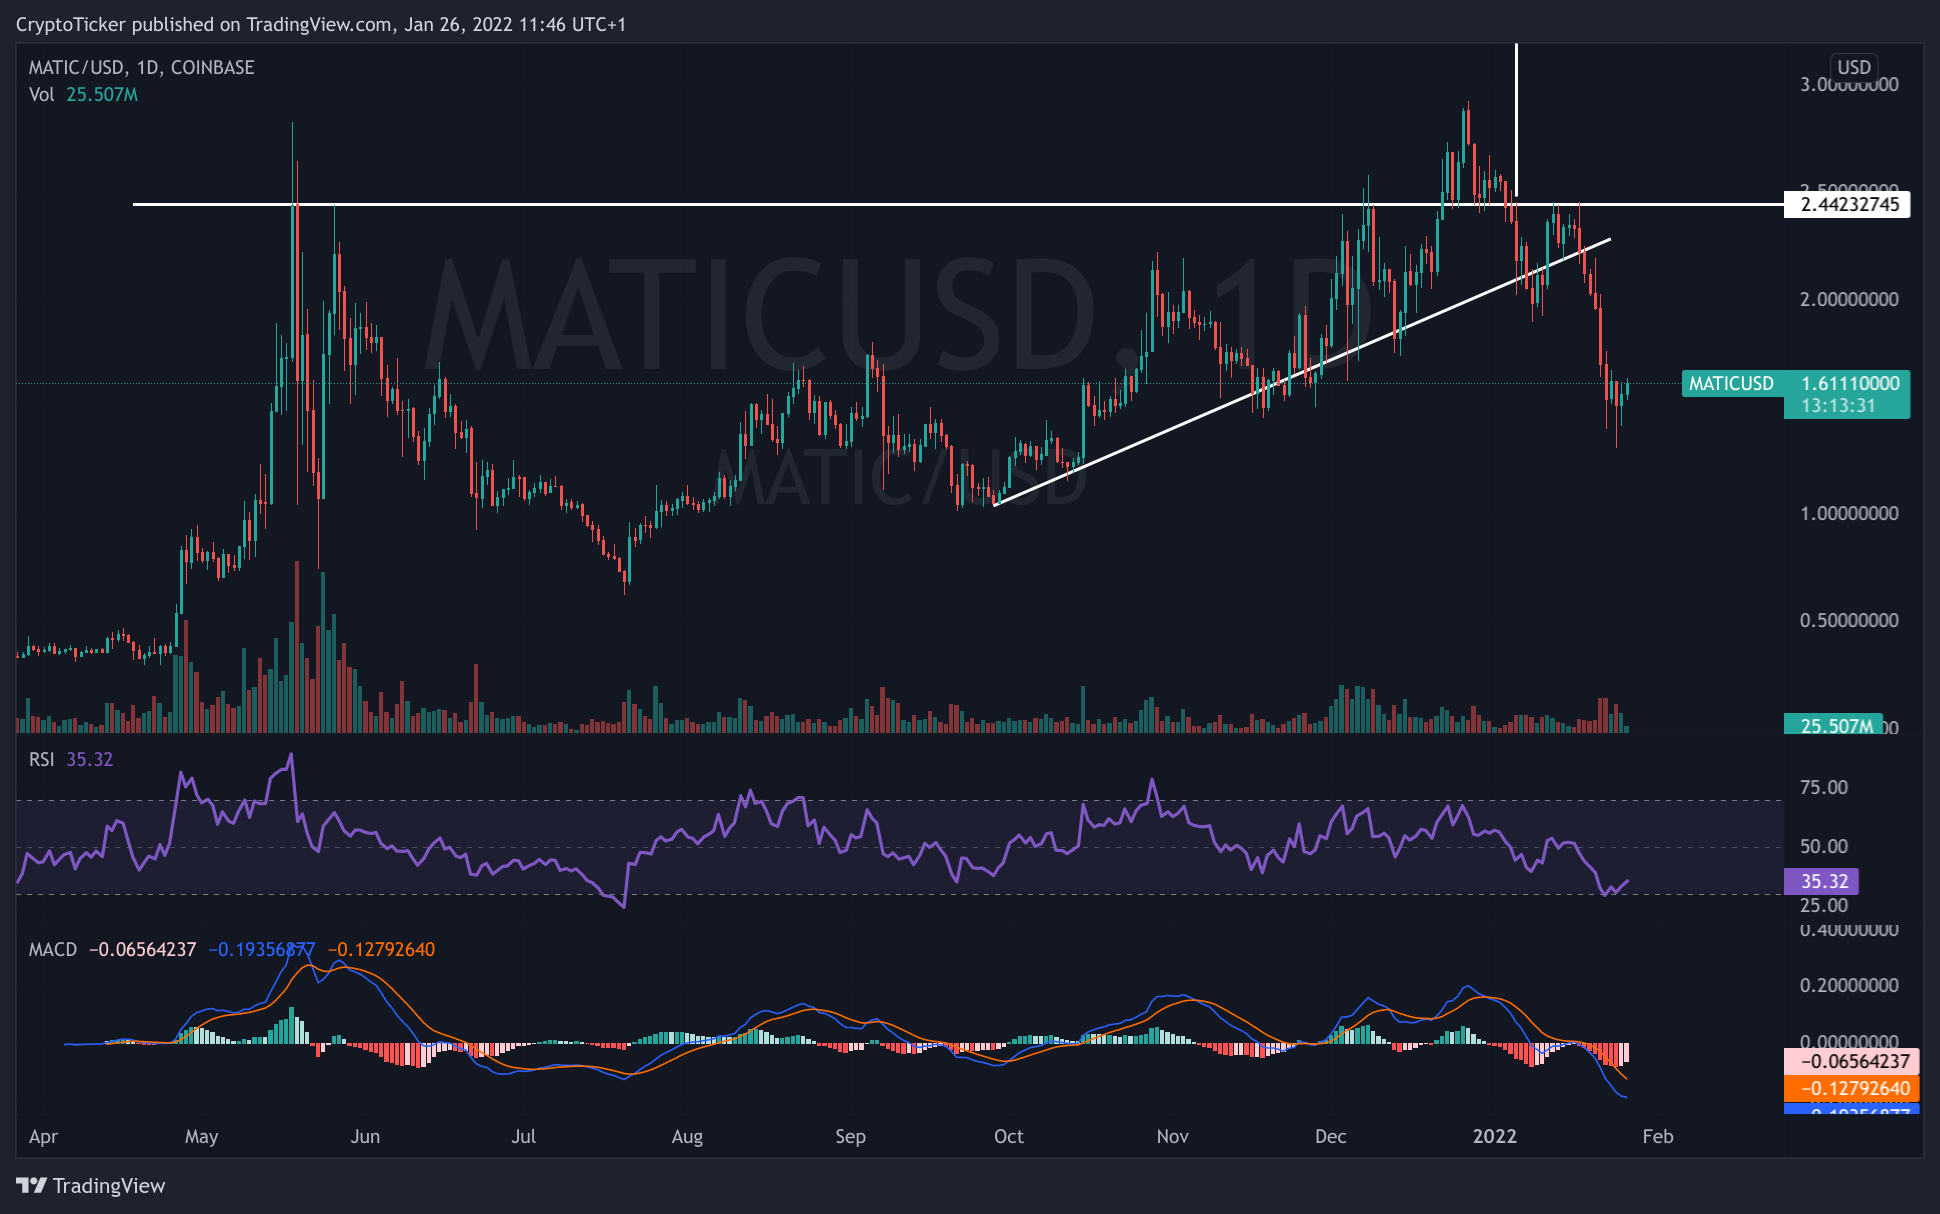 Buy MATIC 2022 - MATIC/USD 1-day chart showing MATIC correction